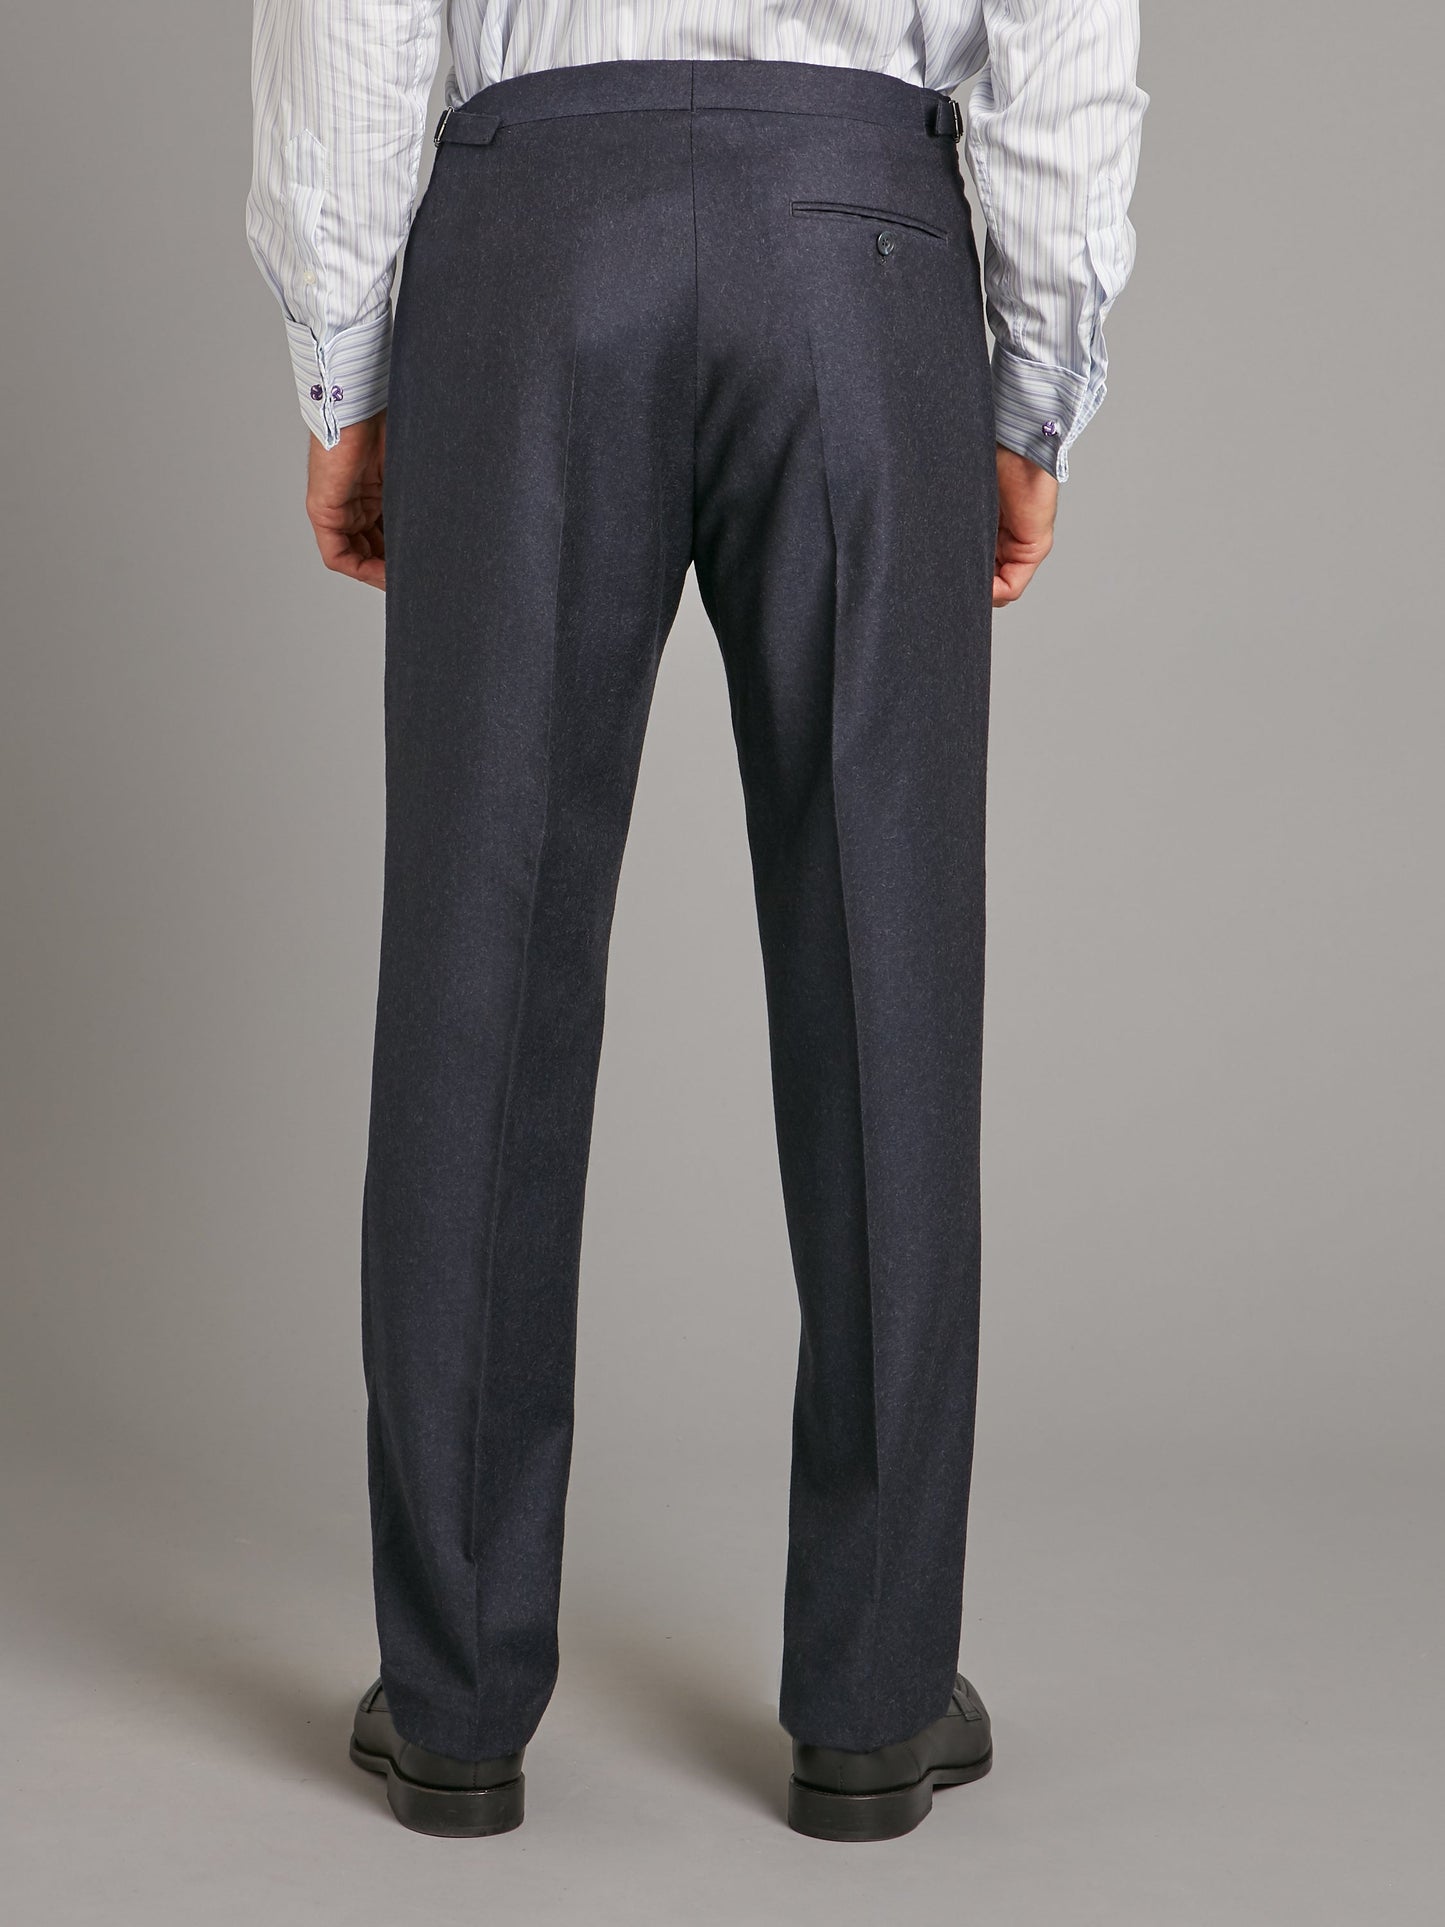 Pleated Suit Trousers - Navy Flannel